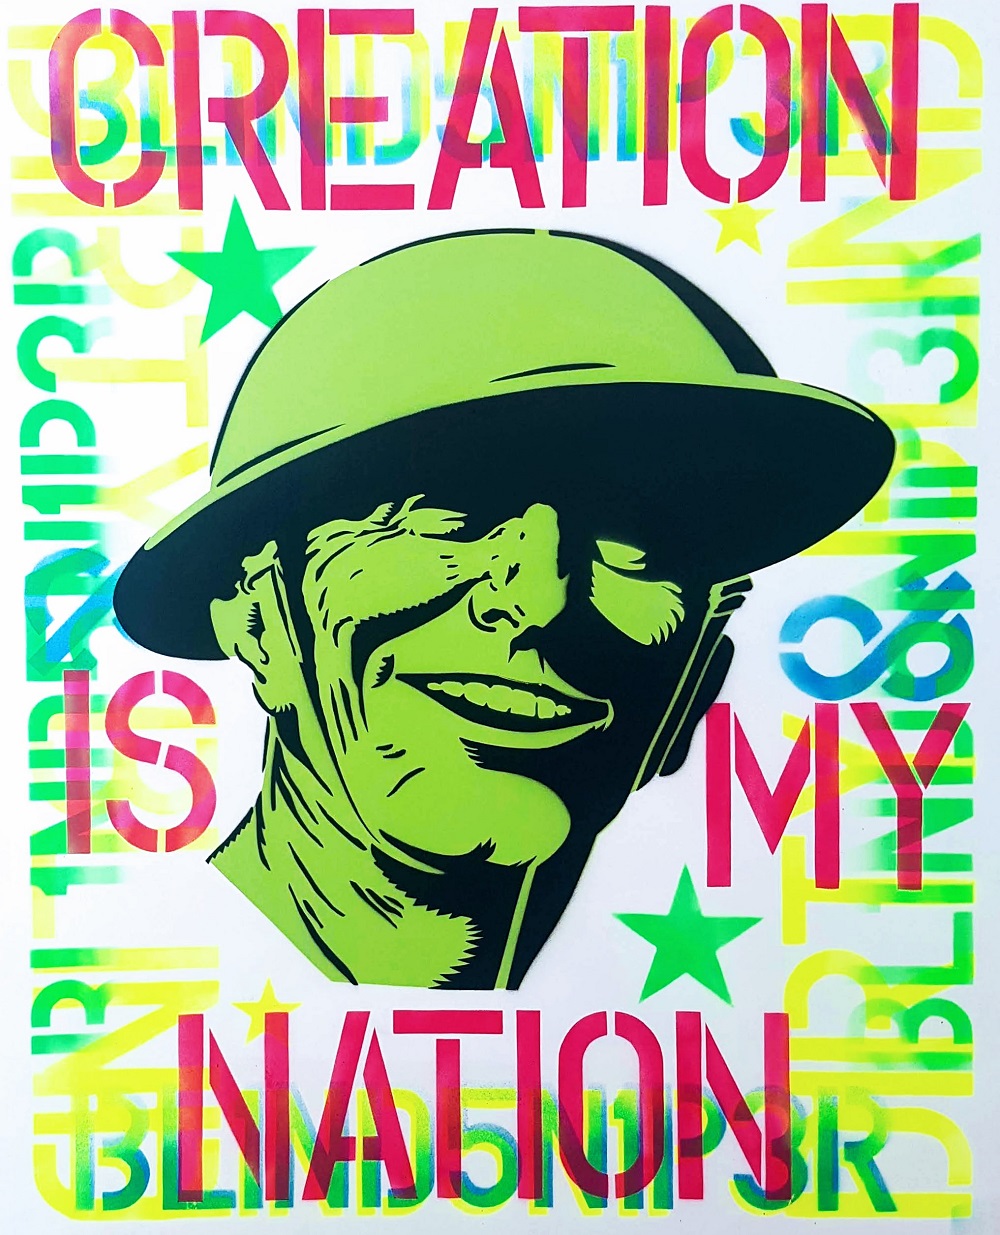 3 CREATION IS MY NATION